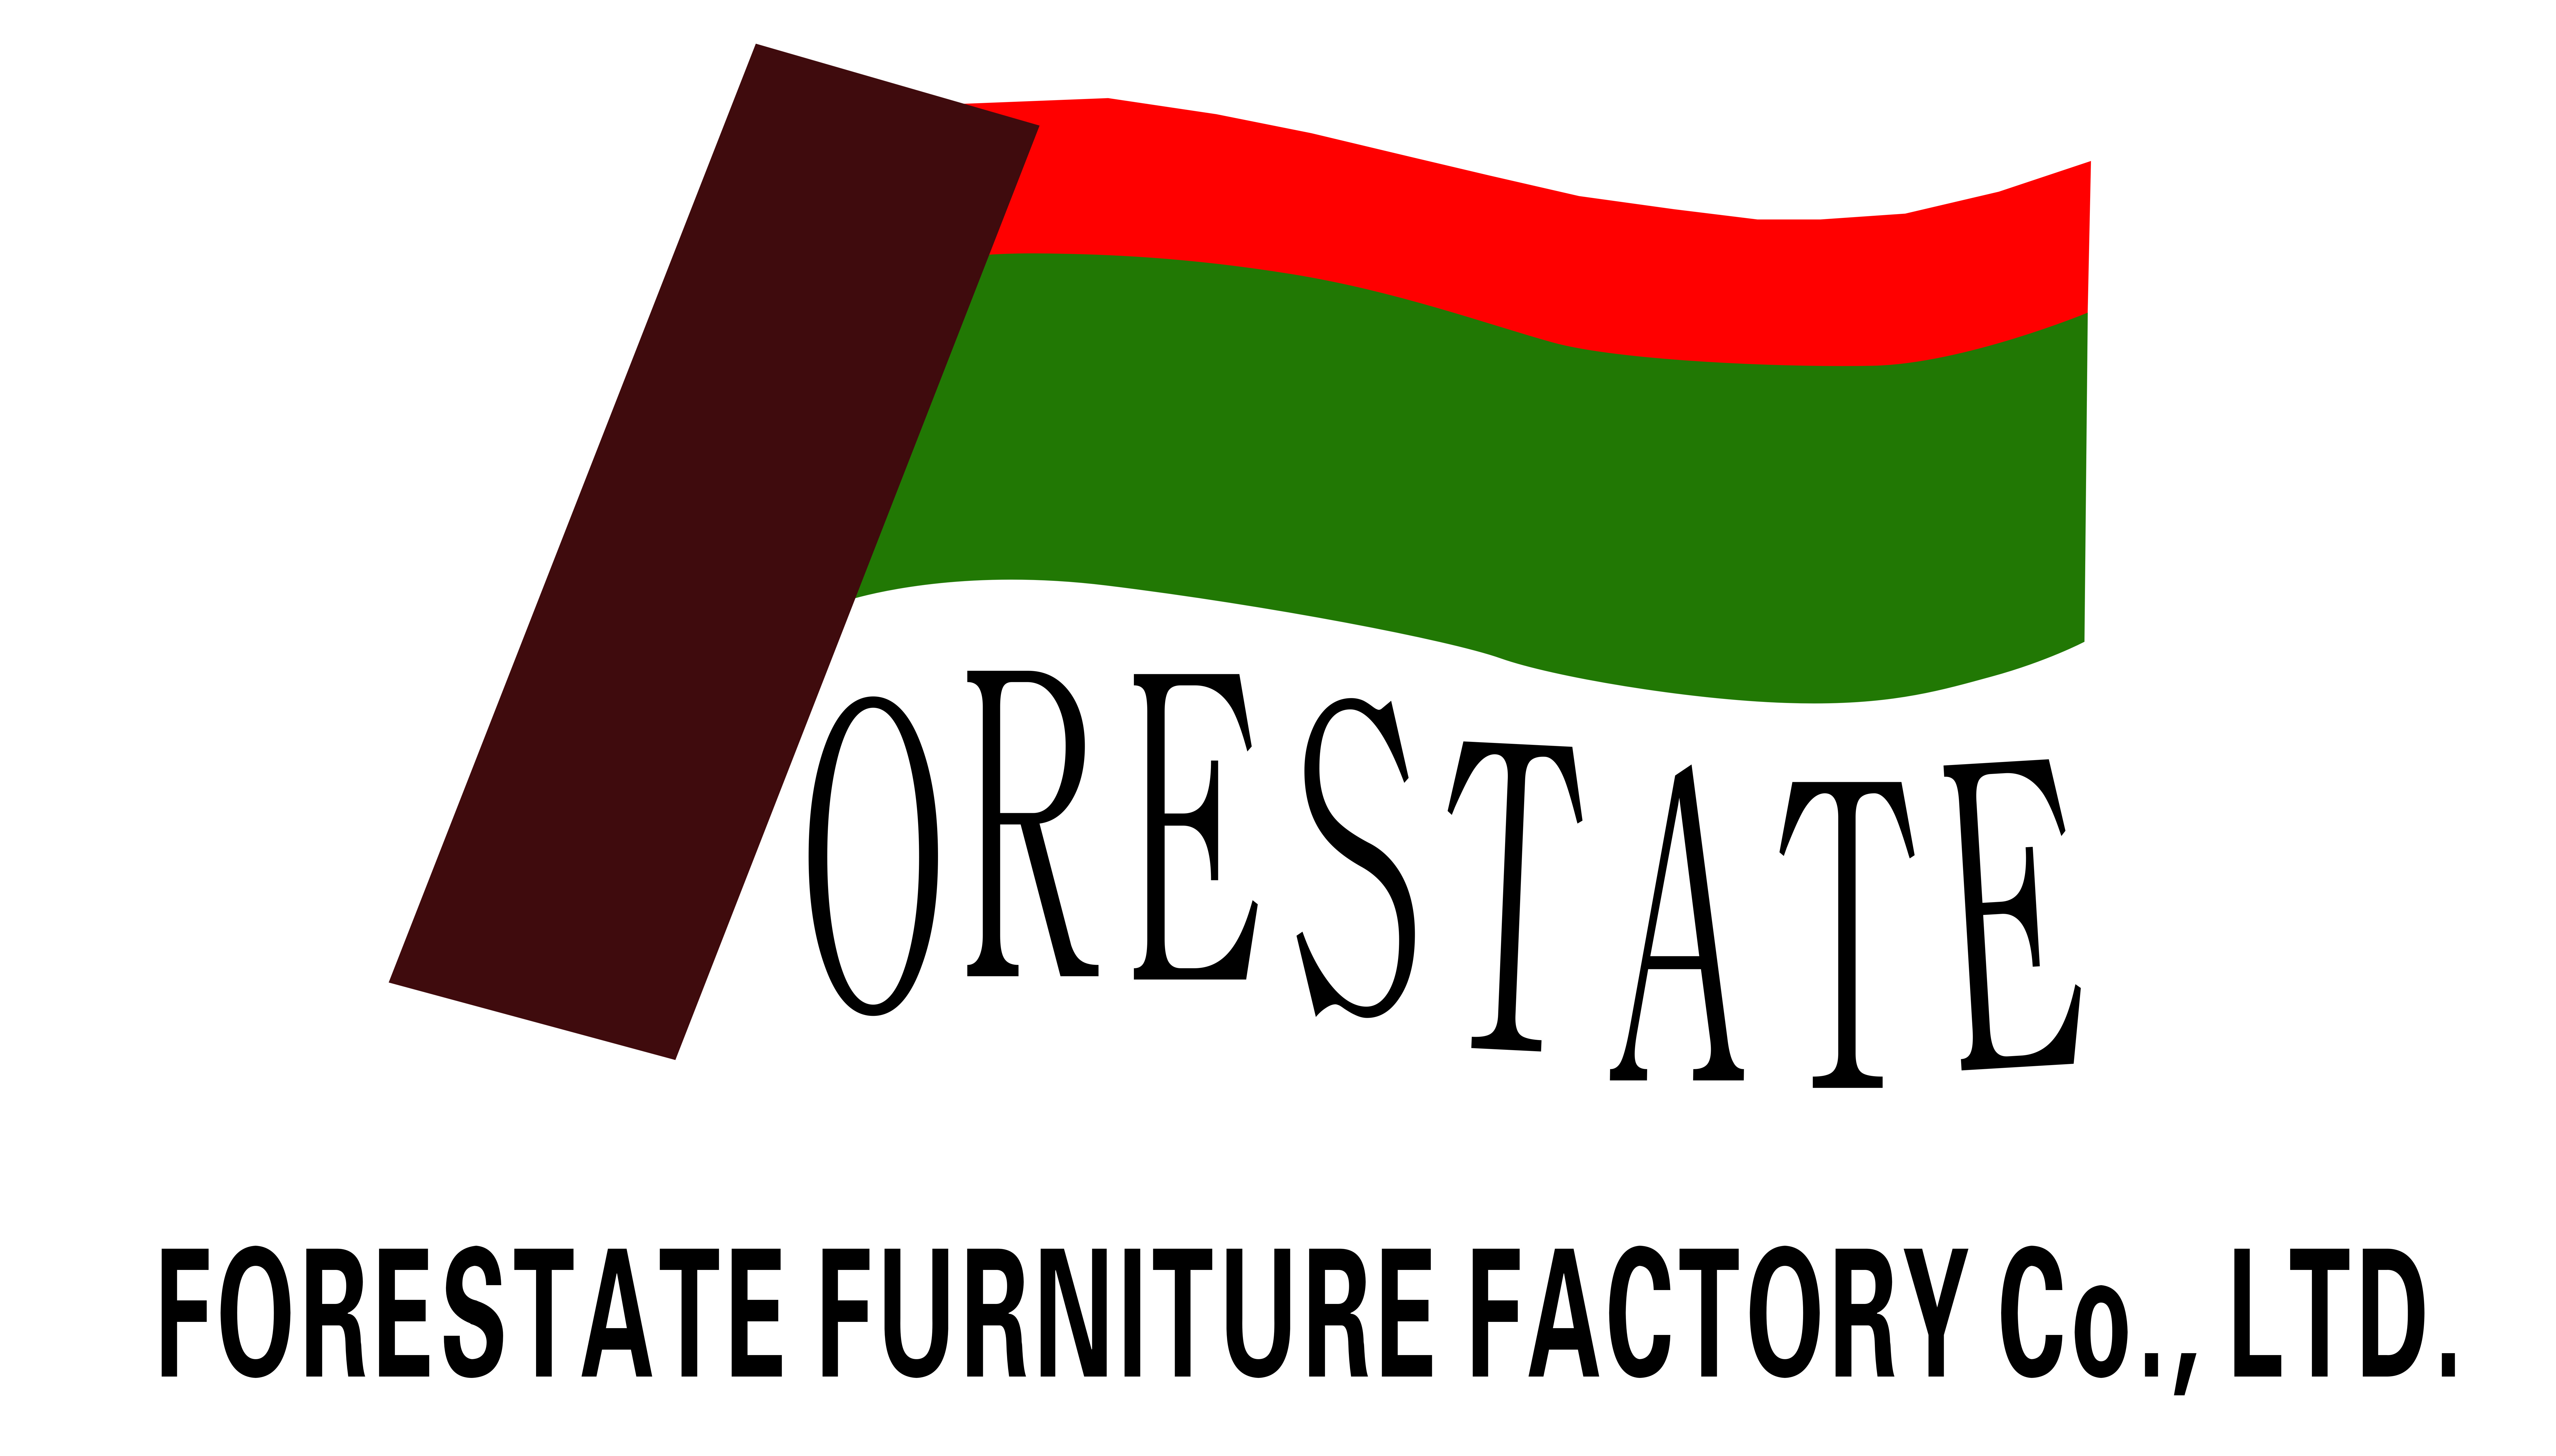 FORESTATE (GUANGXI GUIGANG) FURNITURE FACTORY CO.,LTD.